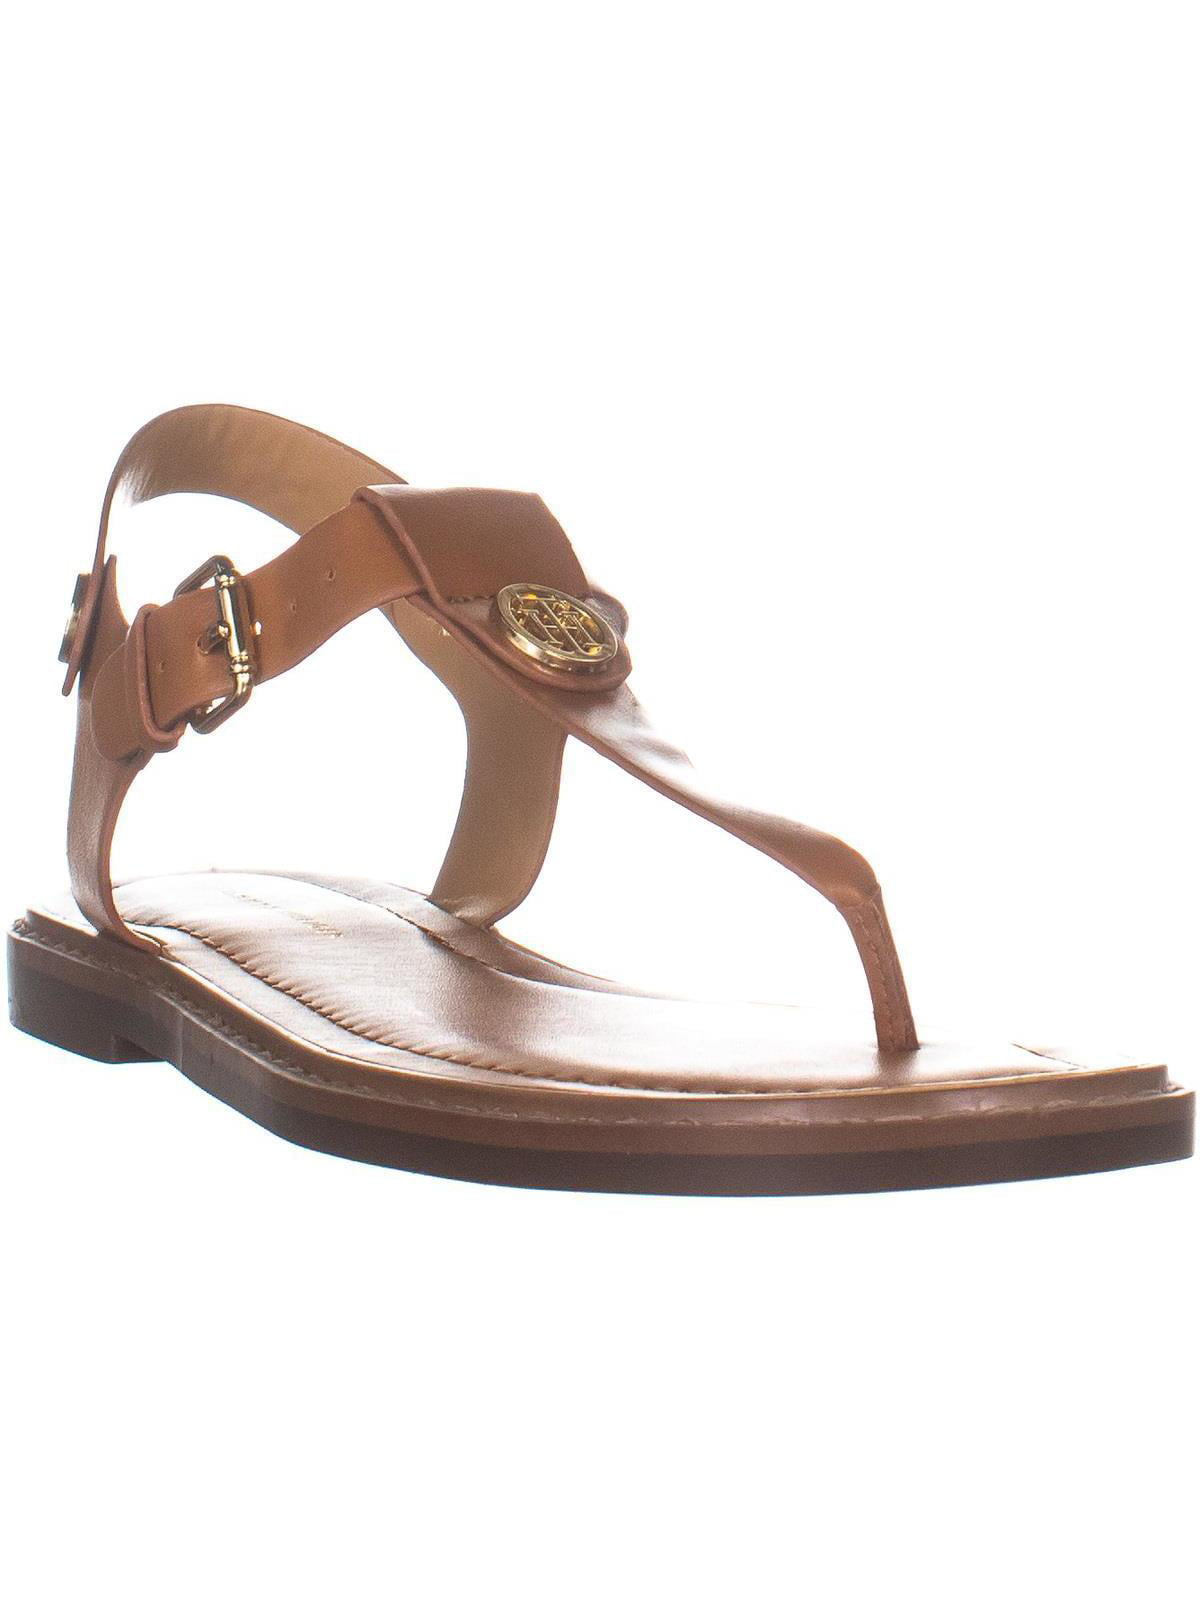 Womens Tommy Hilfiger Thong Flat Sandals, Brown , 8 US -